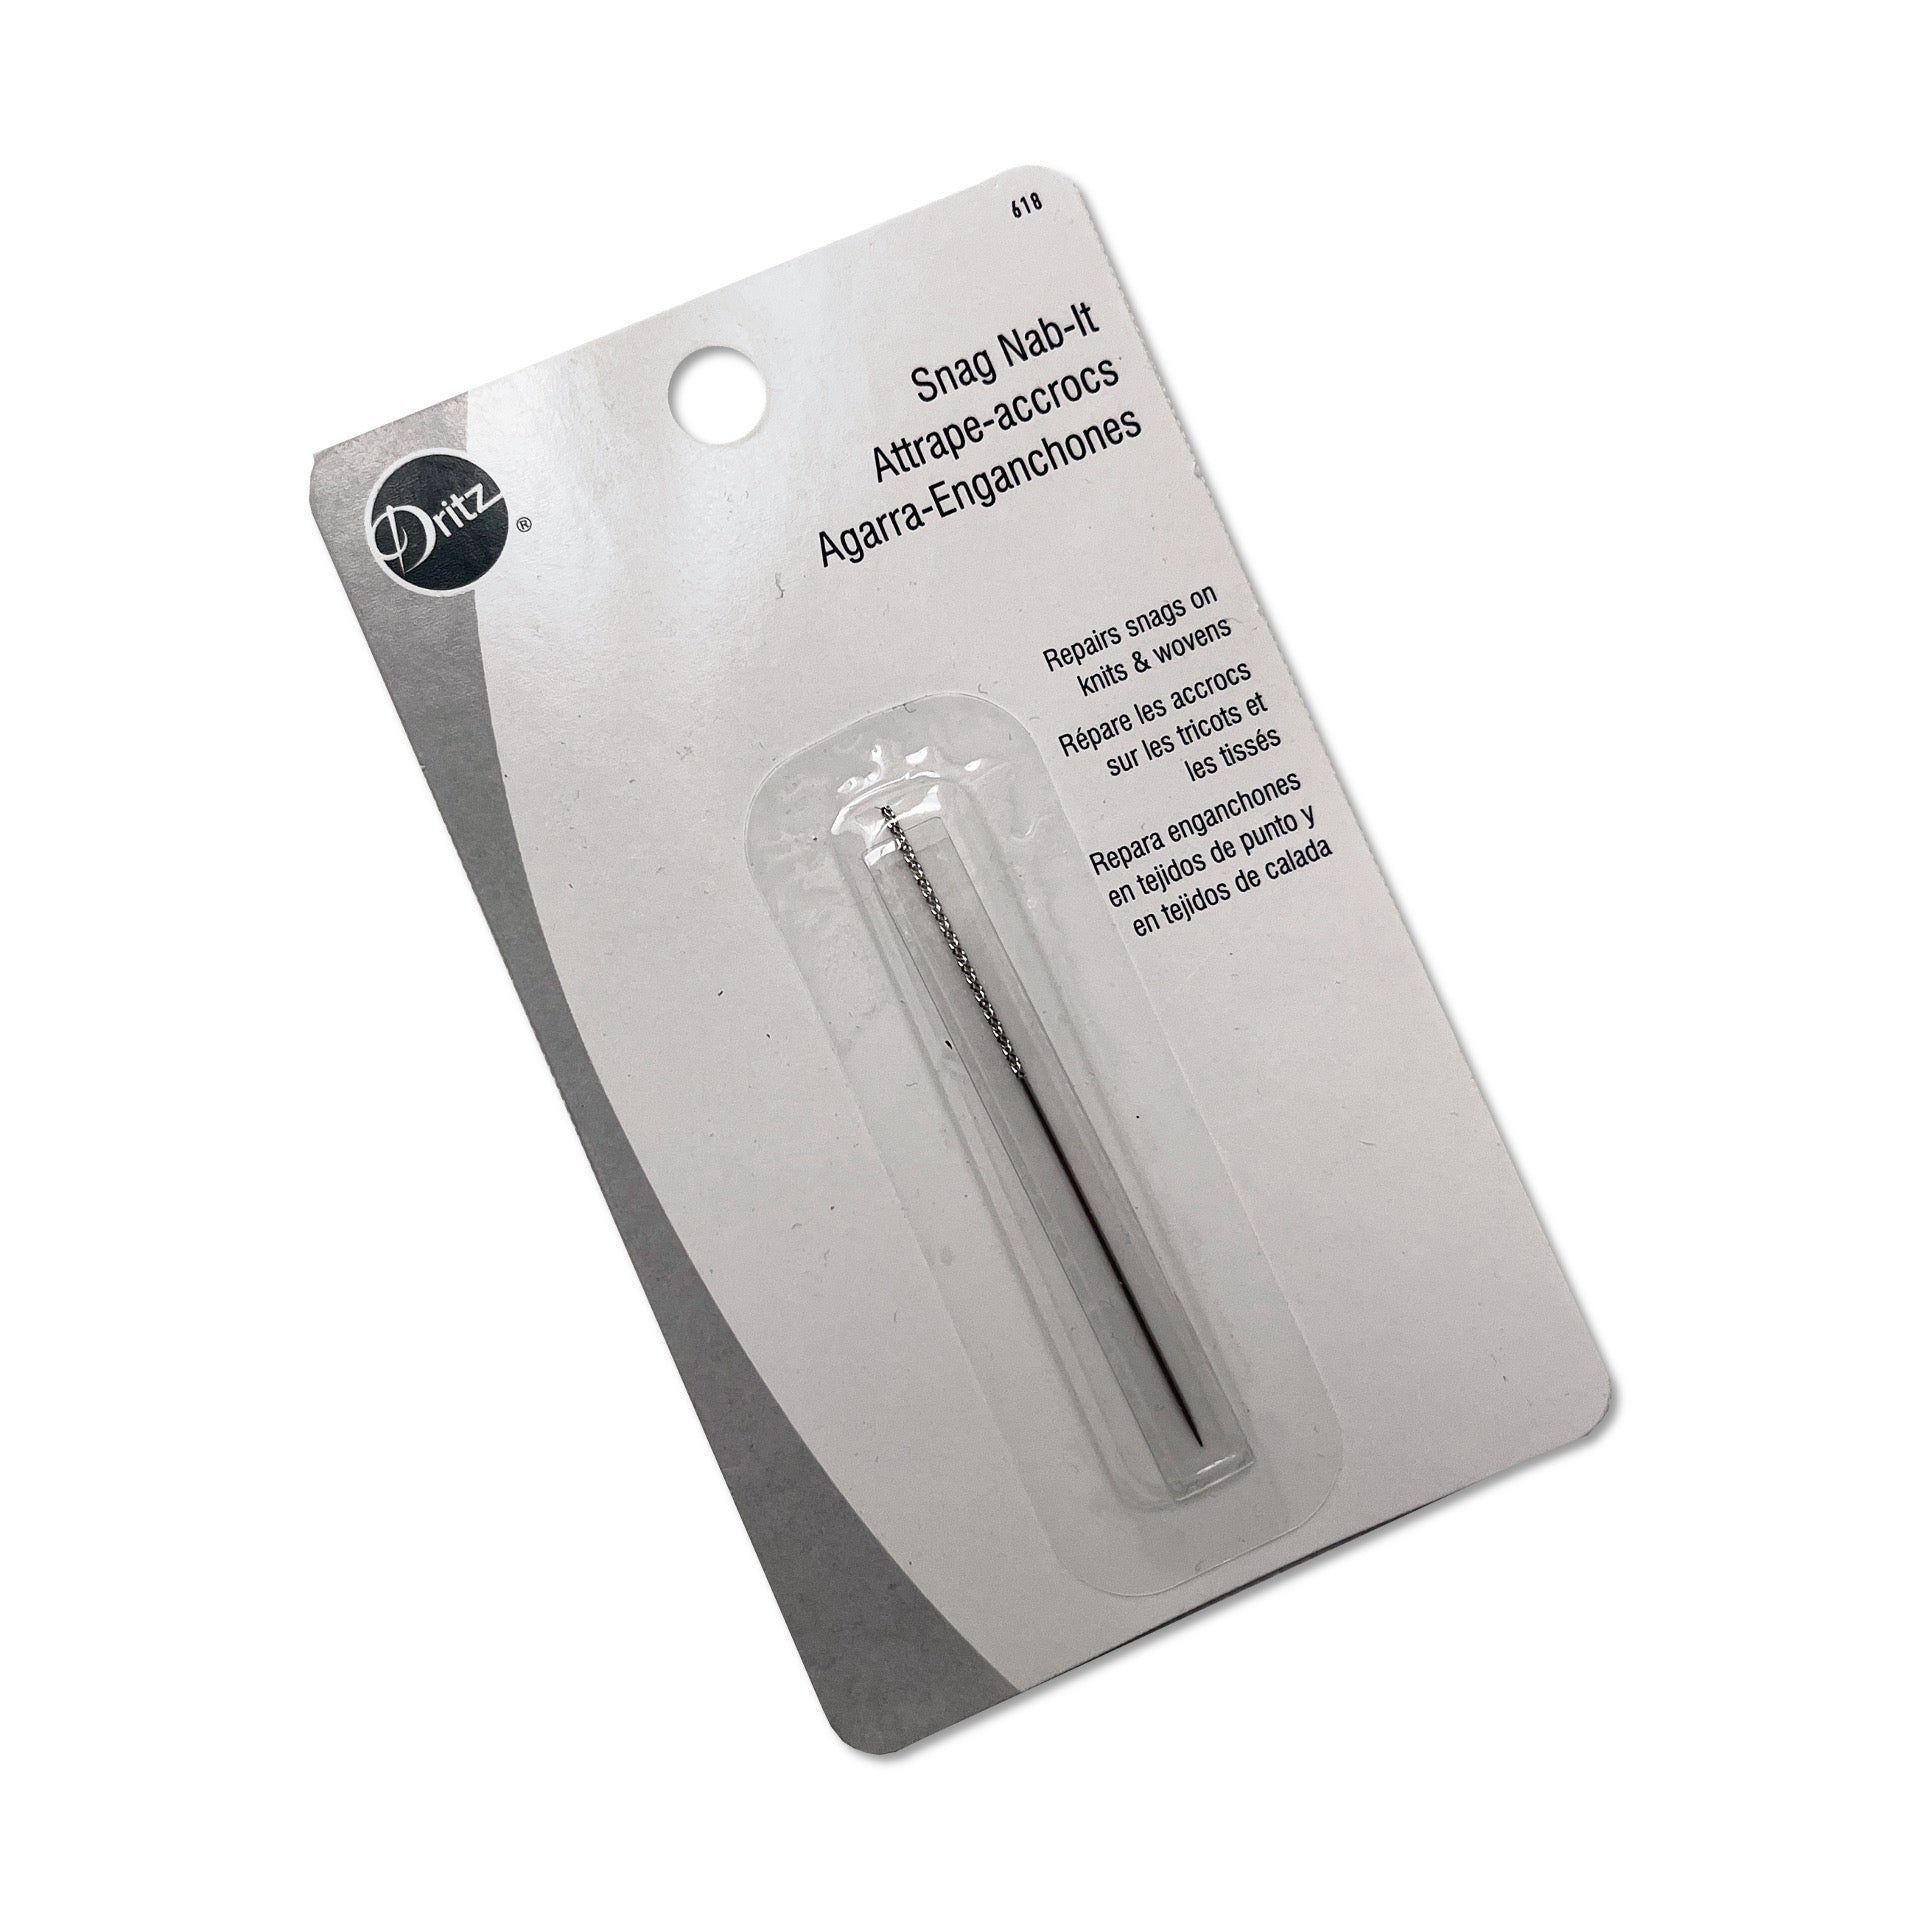 Snag Nab It Dritz Tool by Dritz. get 1 Pack or 2 Use to Fix Snags in Knits  and Wovens. Dritz 618 